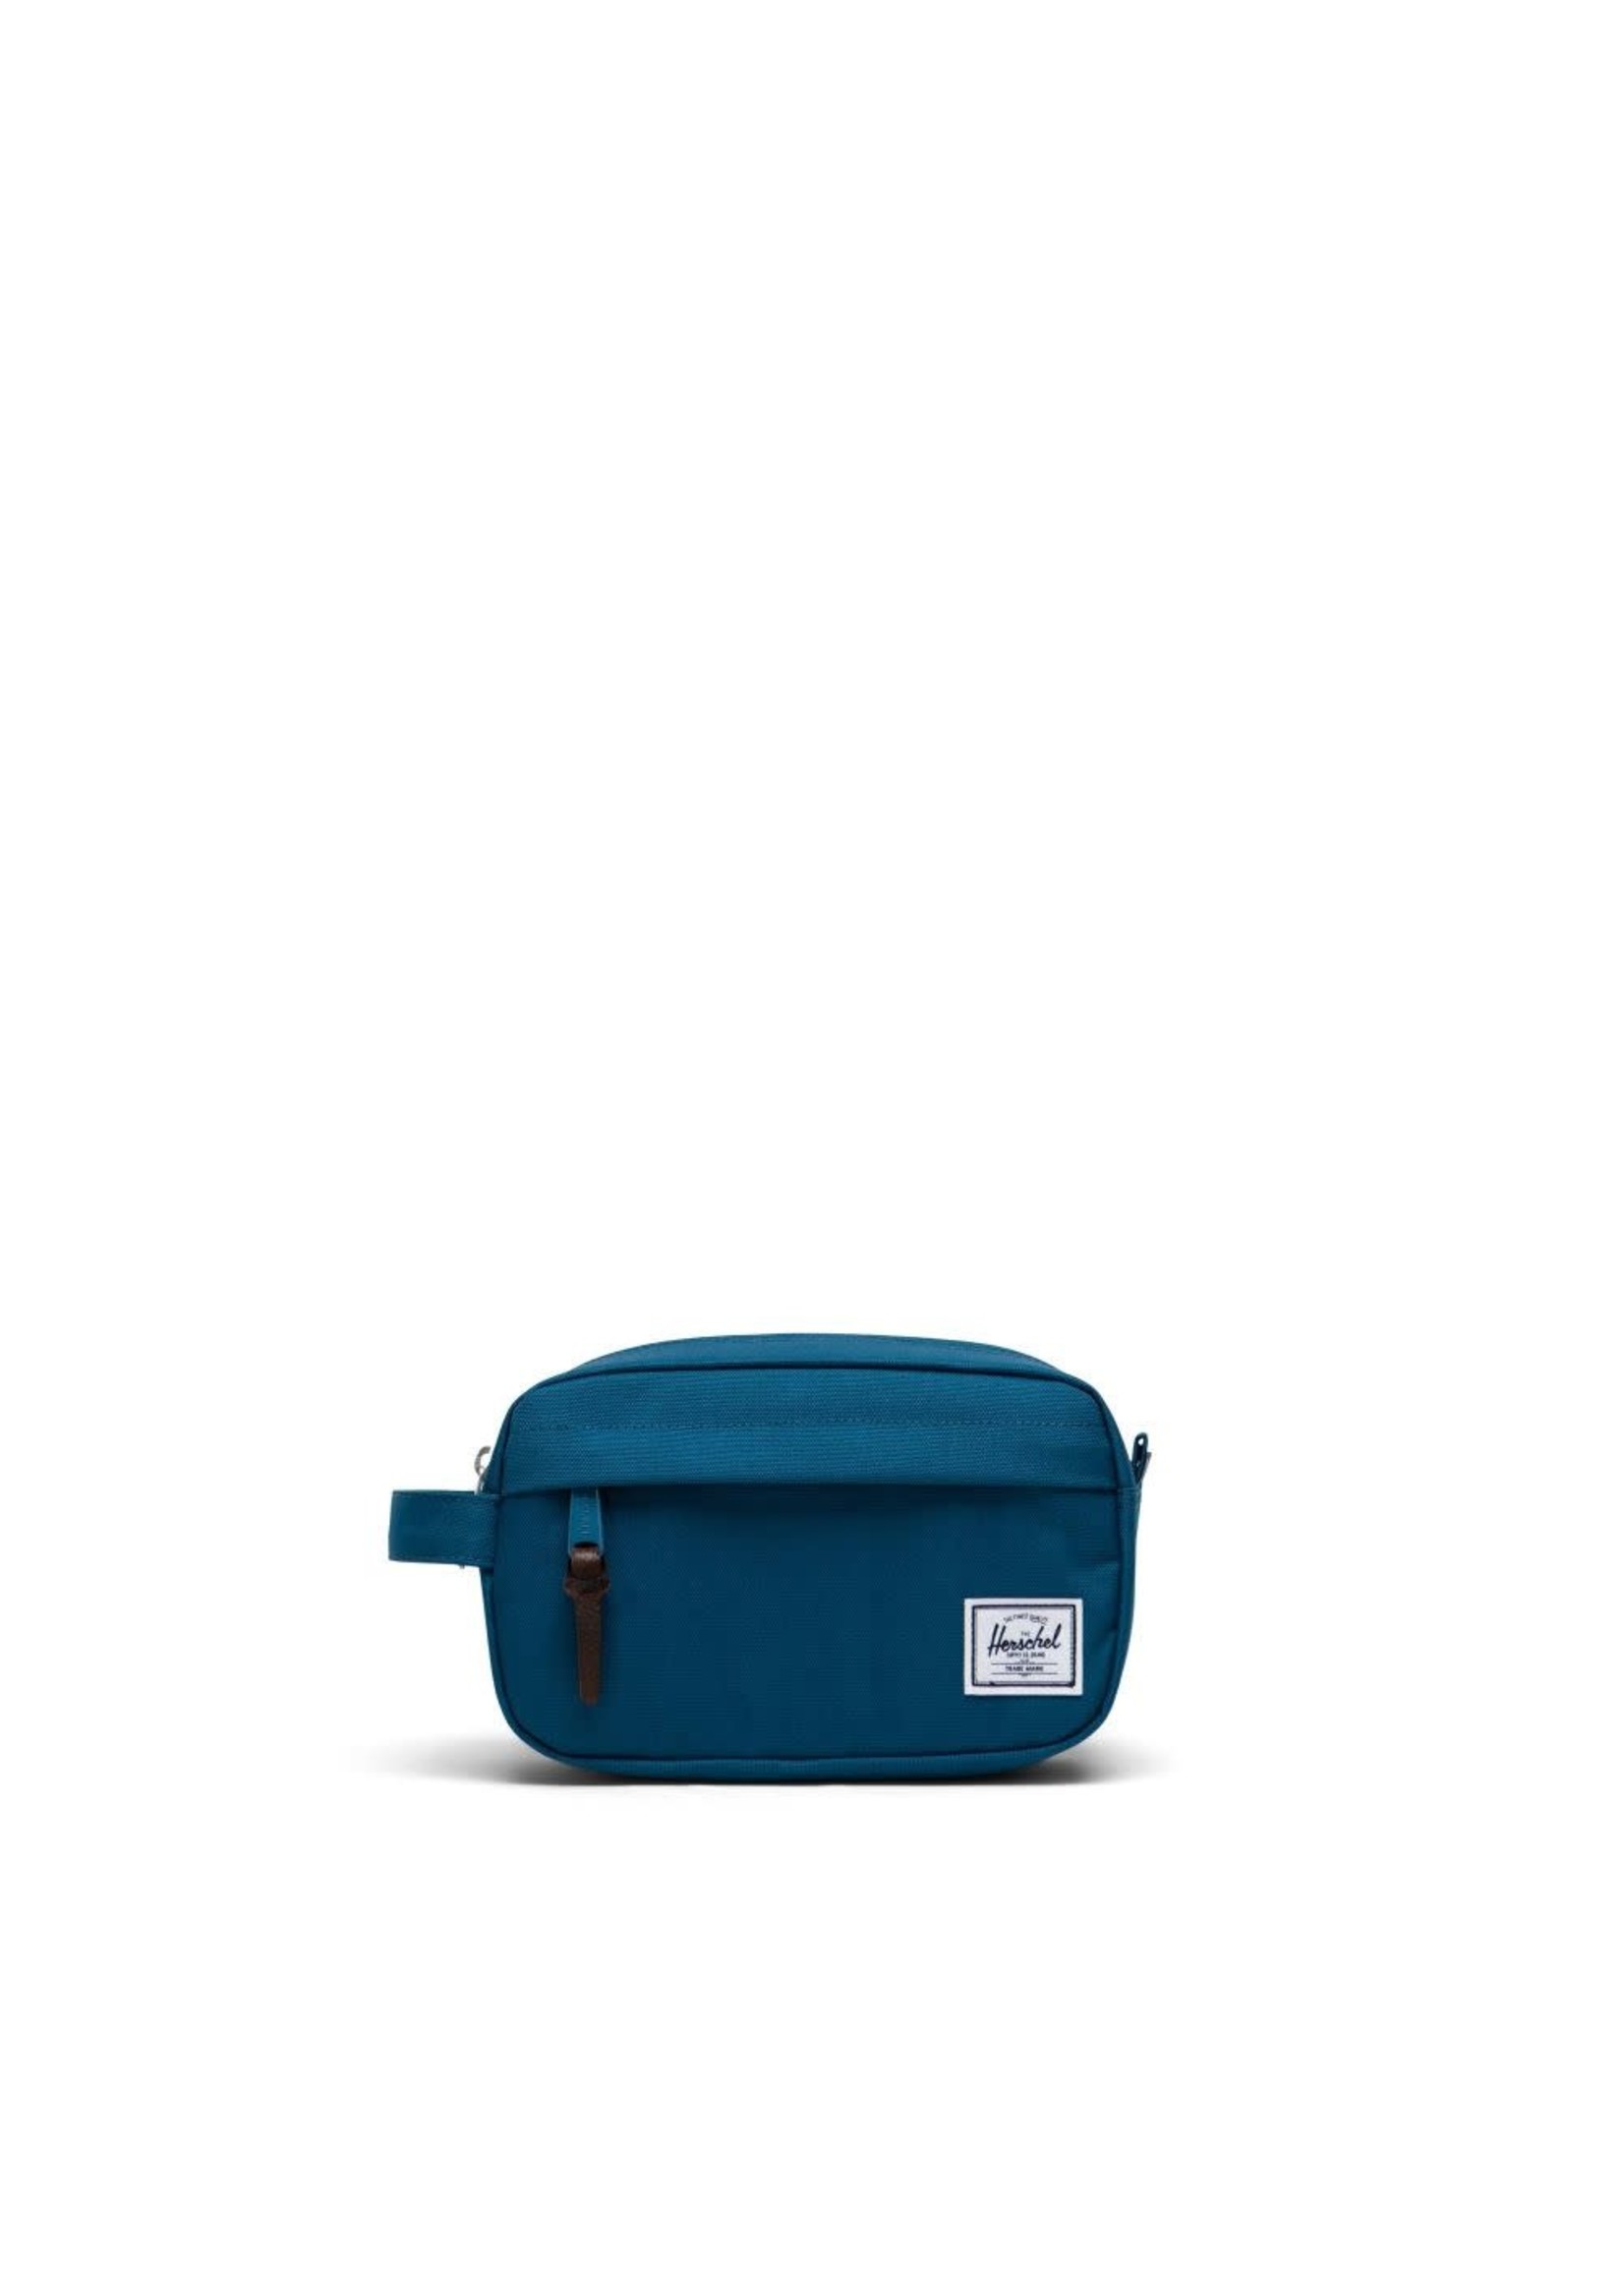 HERSCHEL SUPPLY CO. CHAPTER CARRY ON- VARIOUS STYLES!